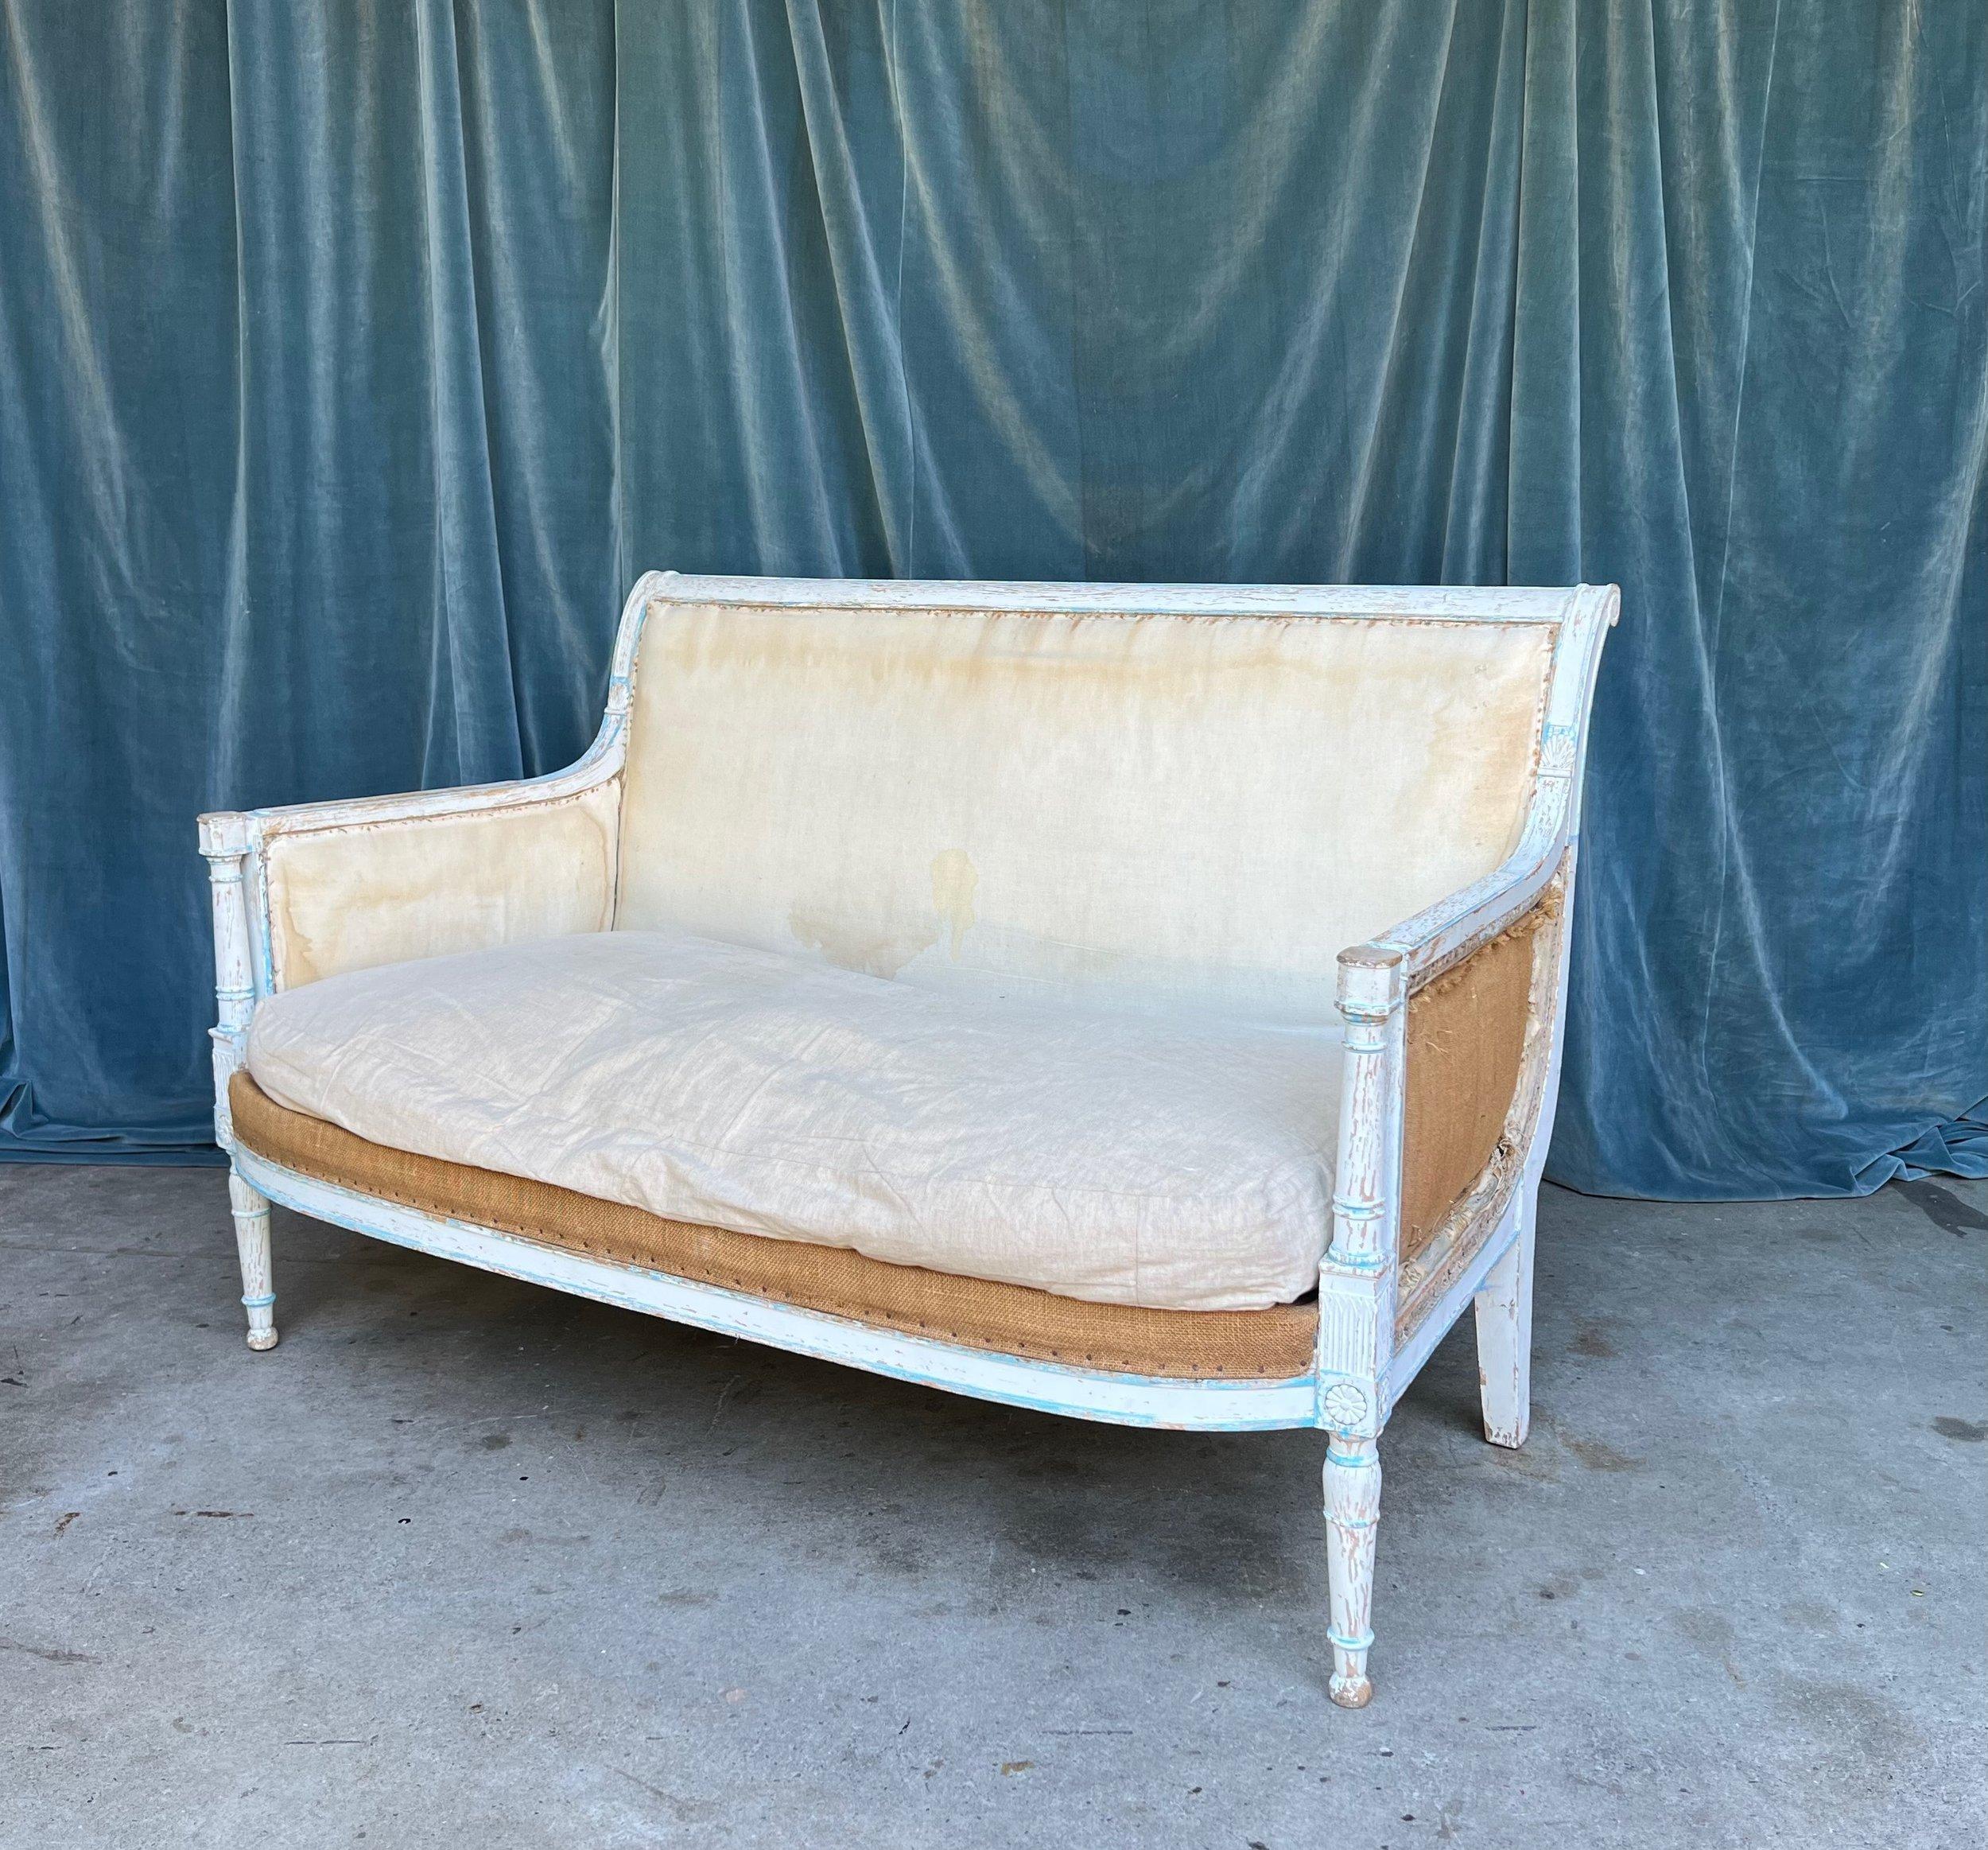 This stunning French 19th century settee, styled in the Directoire manner, is a testament to timeless elegance. The wooden frame, still bearing remnants of its original blue-painted decoration on a white patina, tells an enduring tale of aesthetics